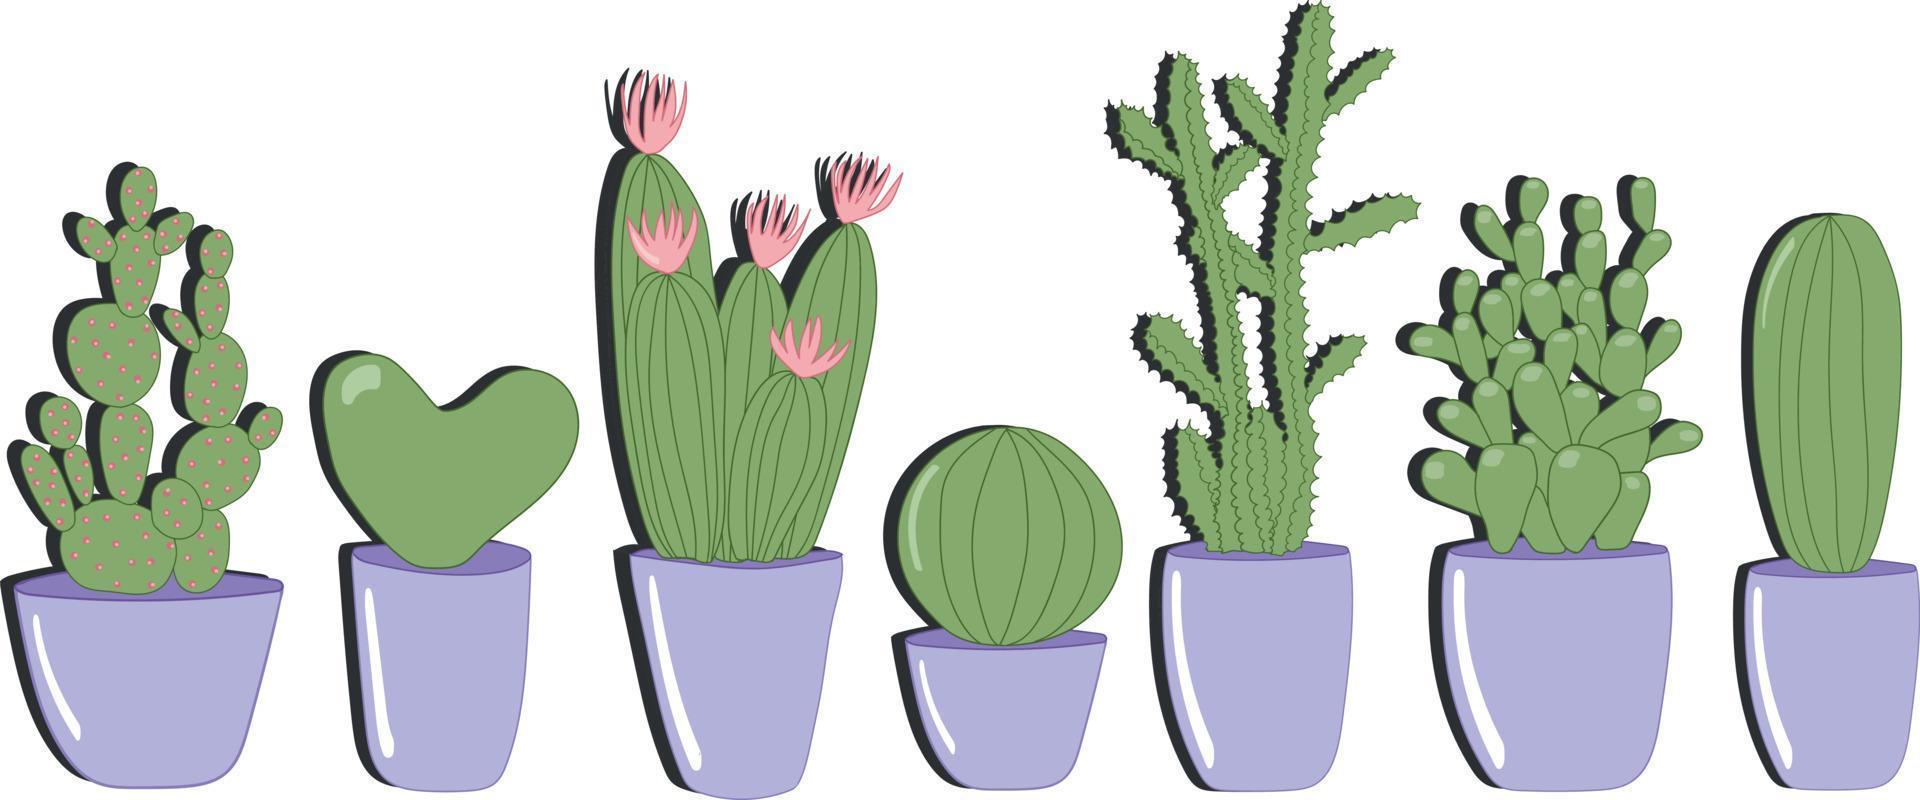 Big vector set different kinds of cactuses in pots. Home plants in pots isolated on white background. Round cactus, heart cactus, cactus with pink flowers, sharp cactus.